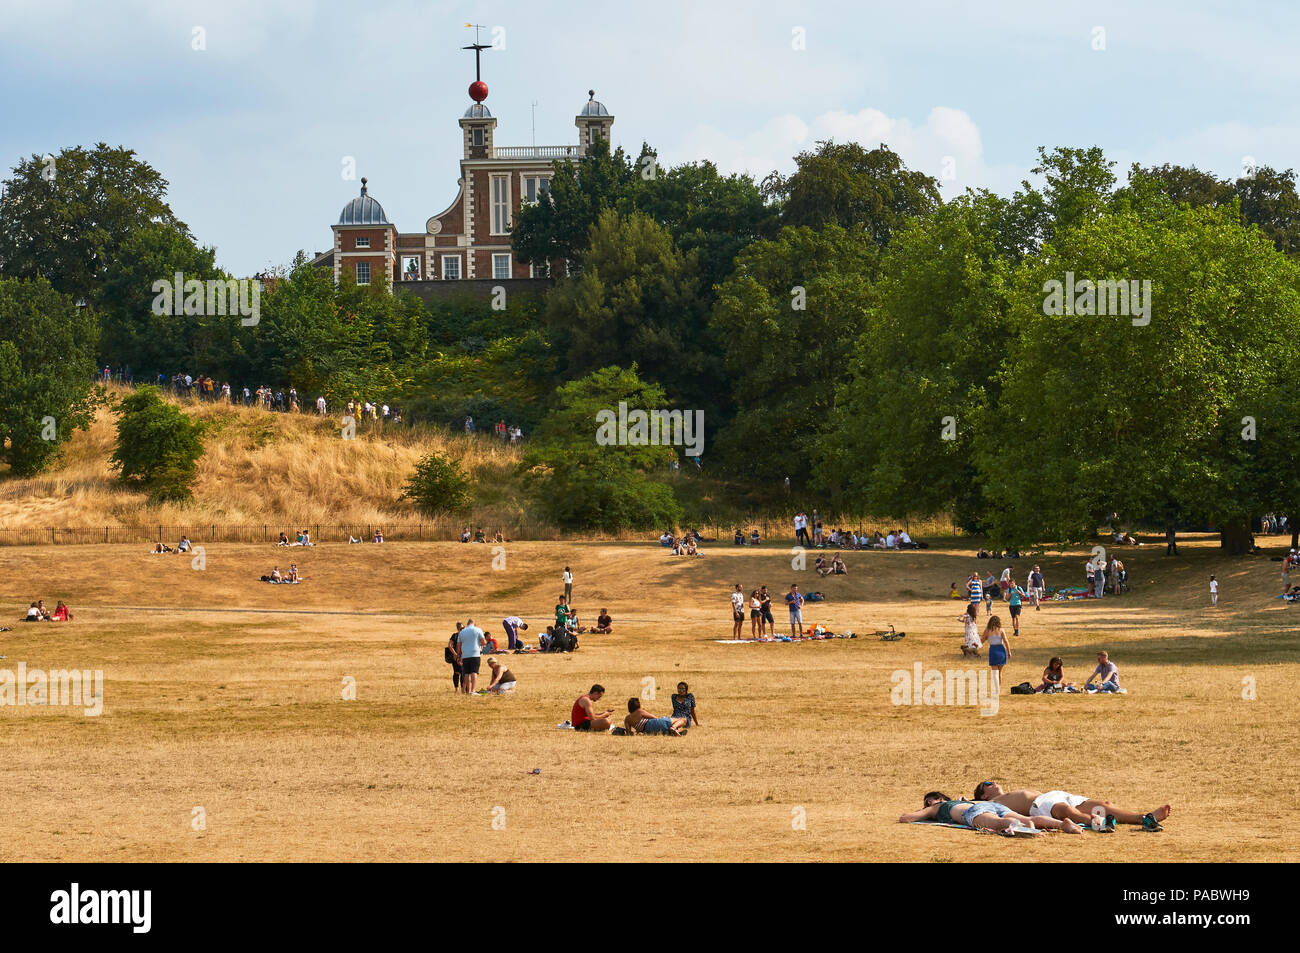 Sunbathers in Greenwich Park London during the 2018 heatwave, with Falmsteed House, Greenwich Royal Observatory, in the background Stock Photo